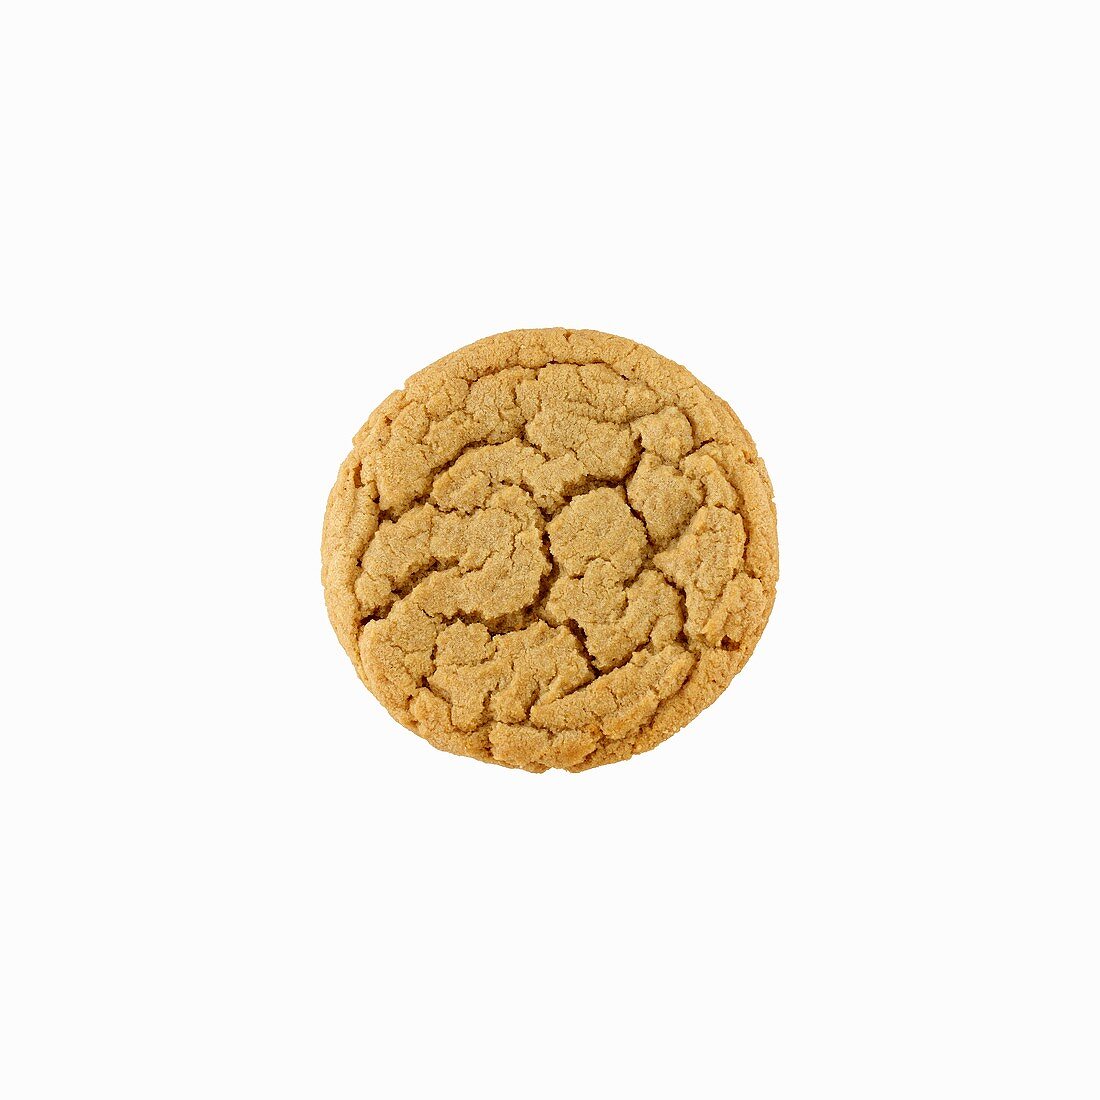 A peanut butter biscuit